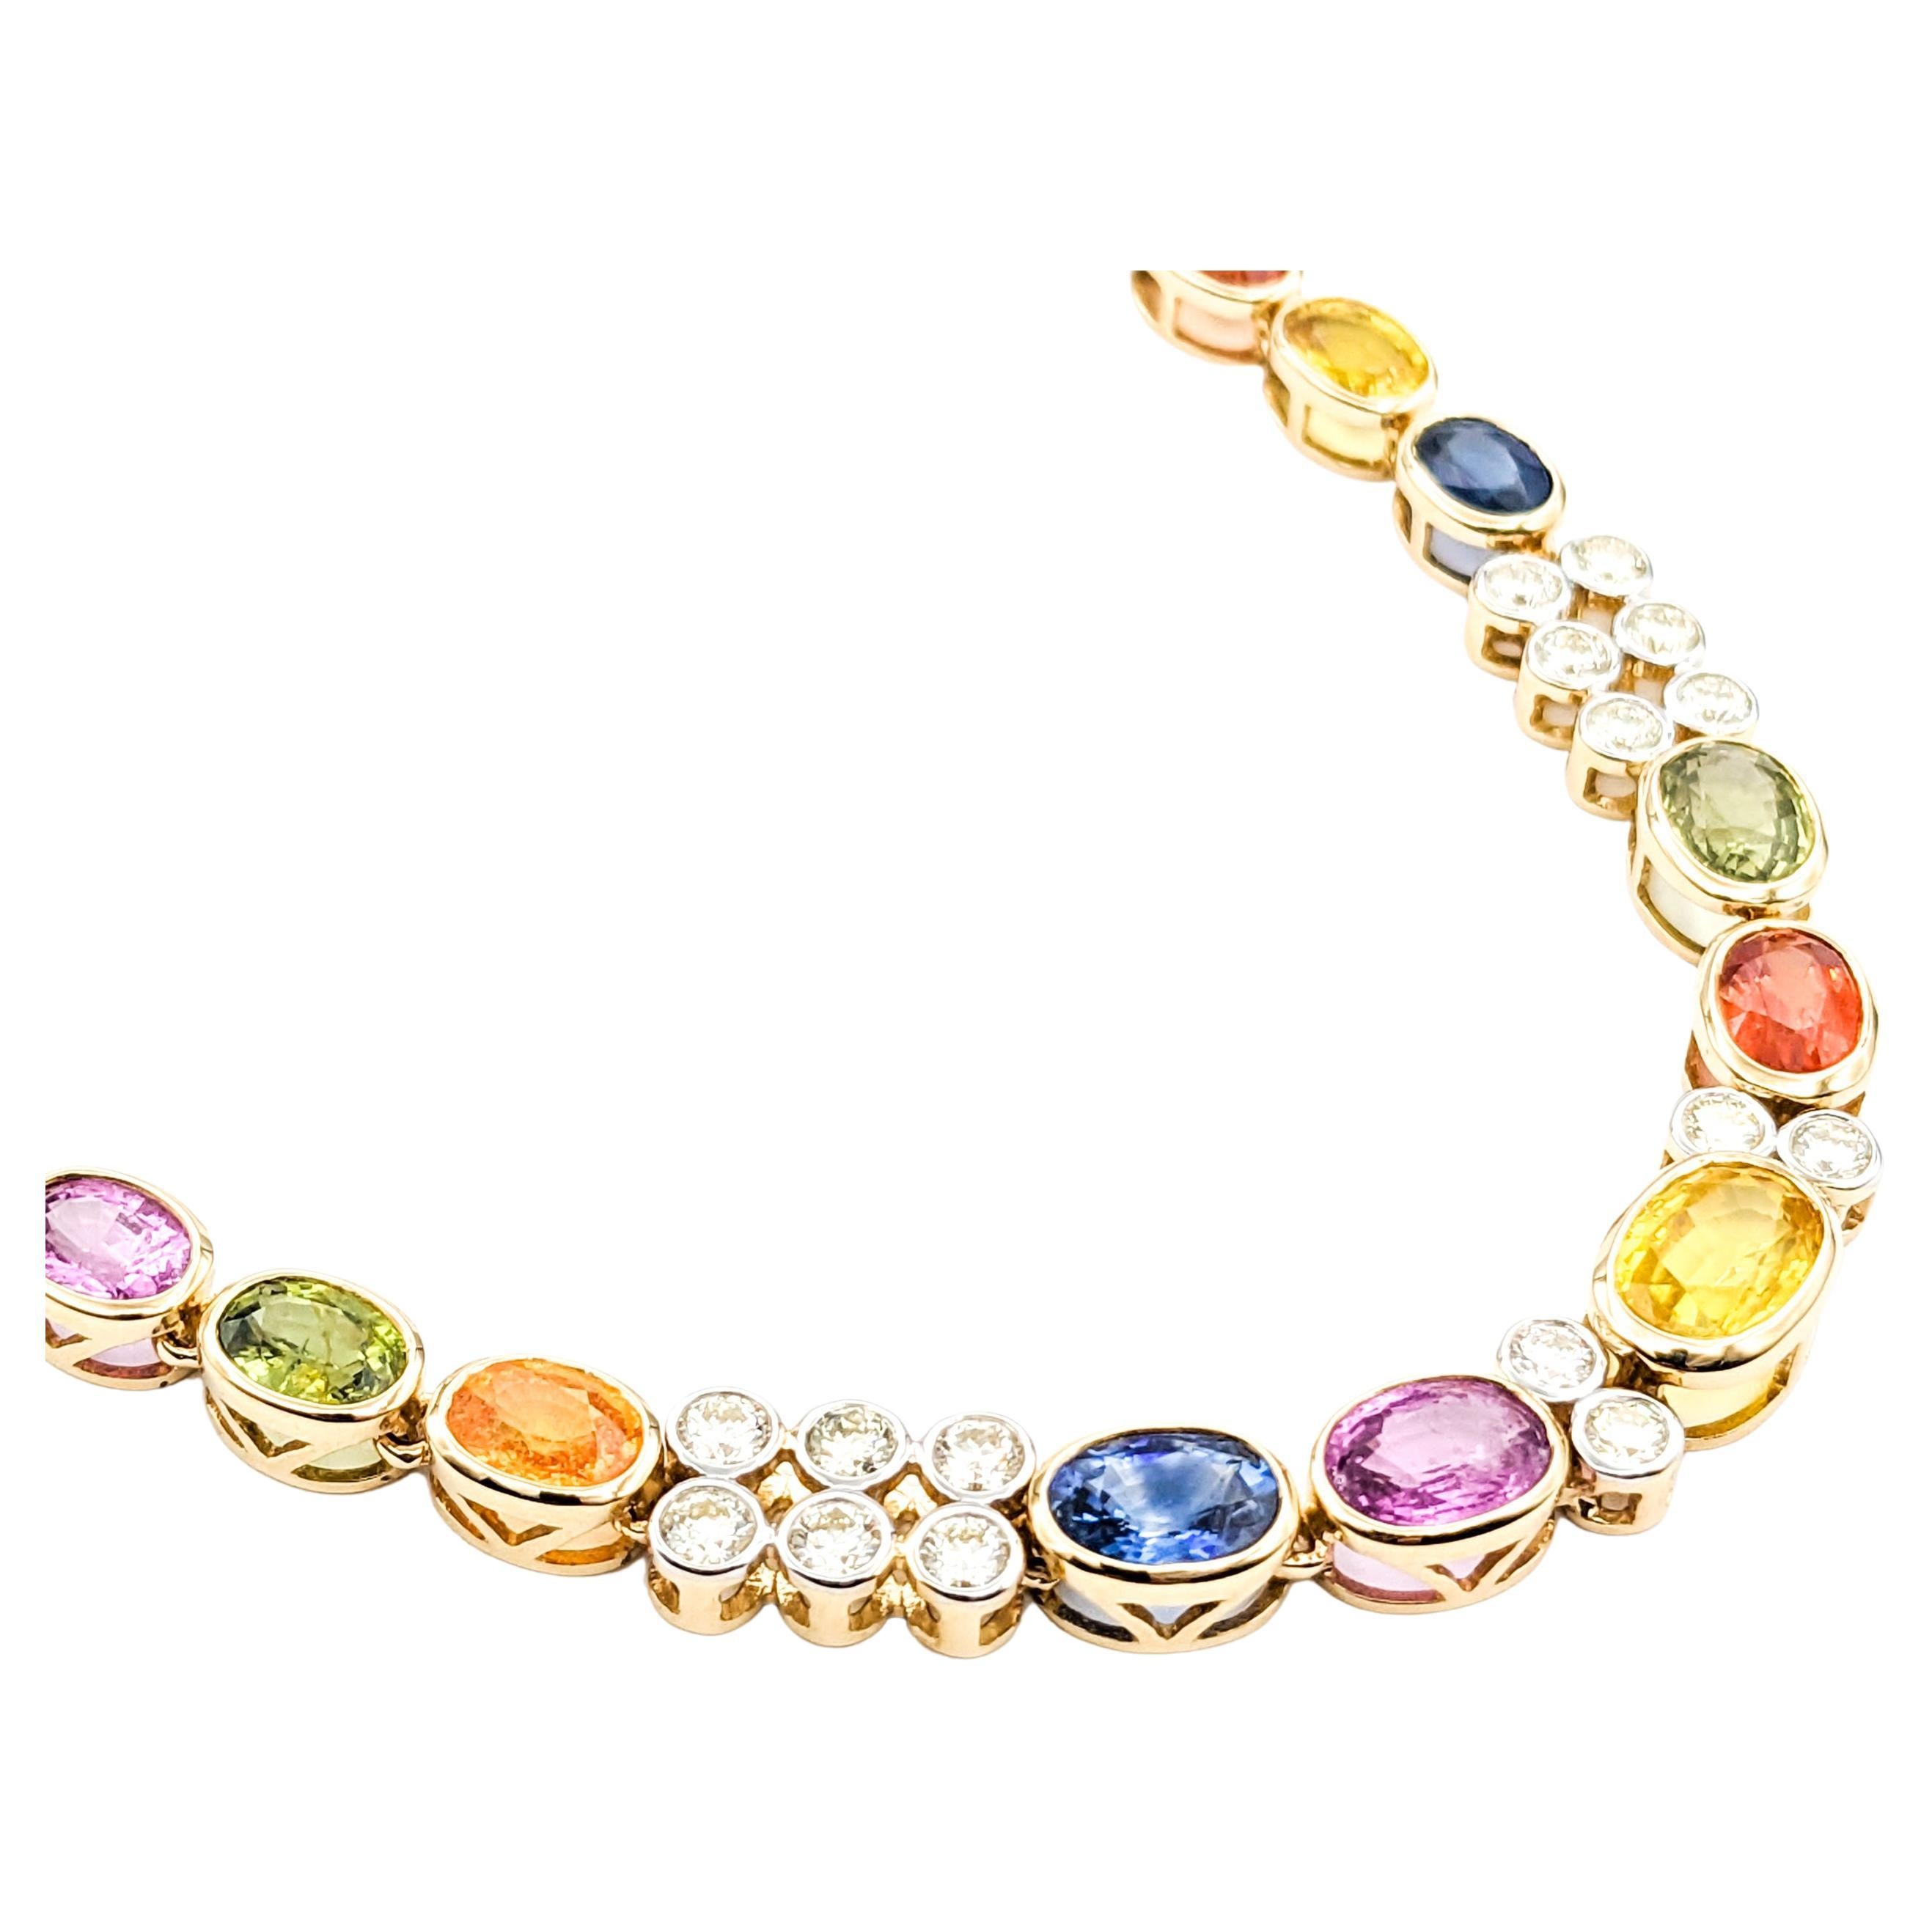 36.02ctw of Multi-Colored Sapphires & 1.89ctw Diamond Necklace In Yellow Gold For Sale